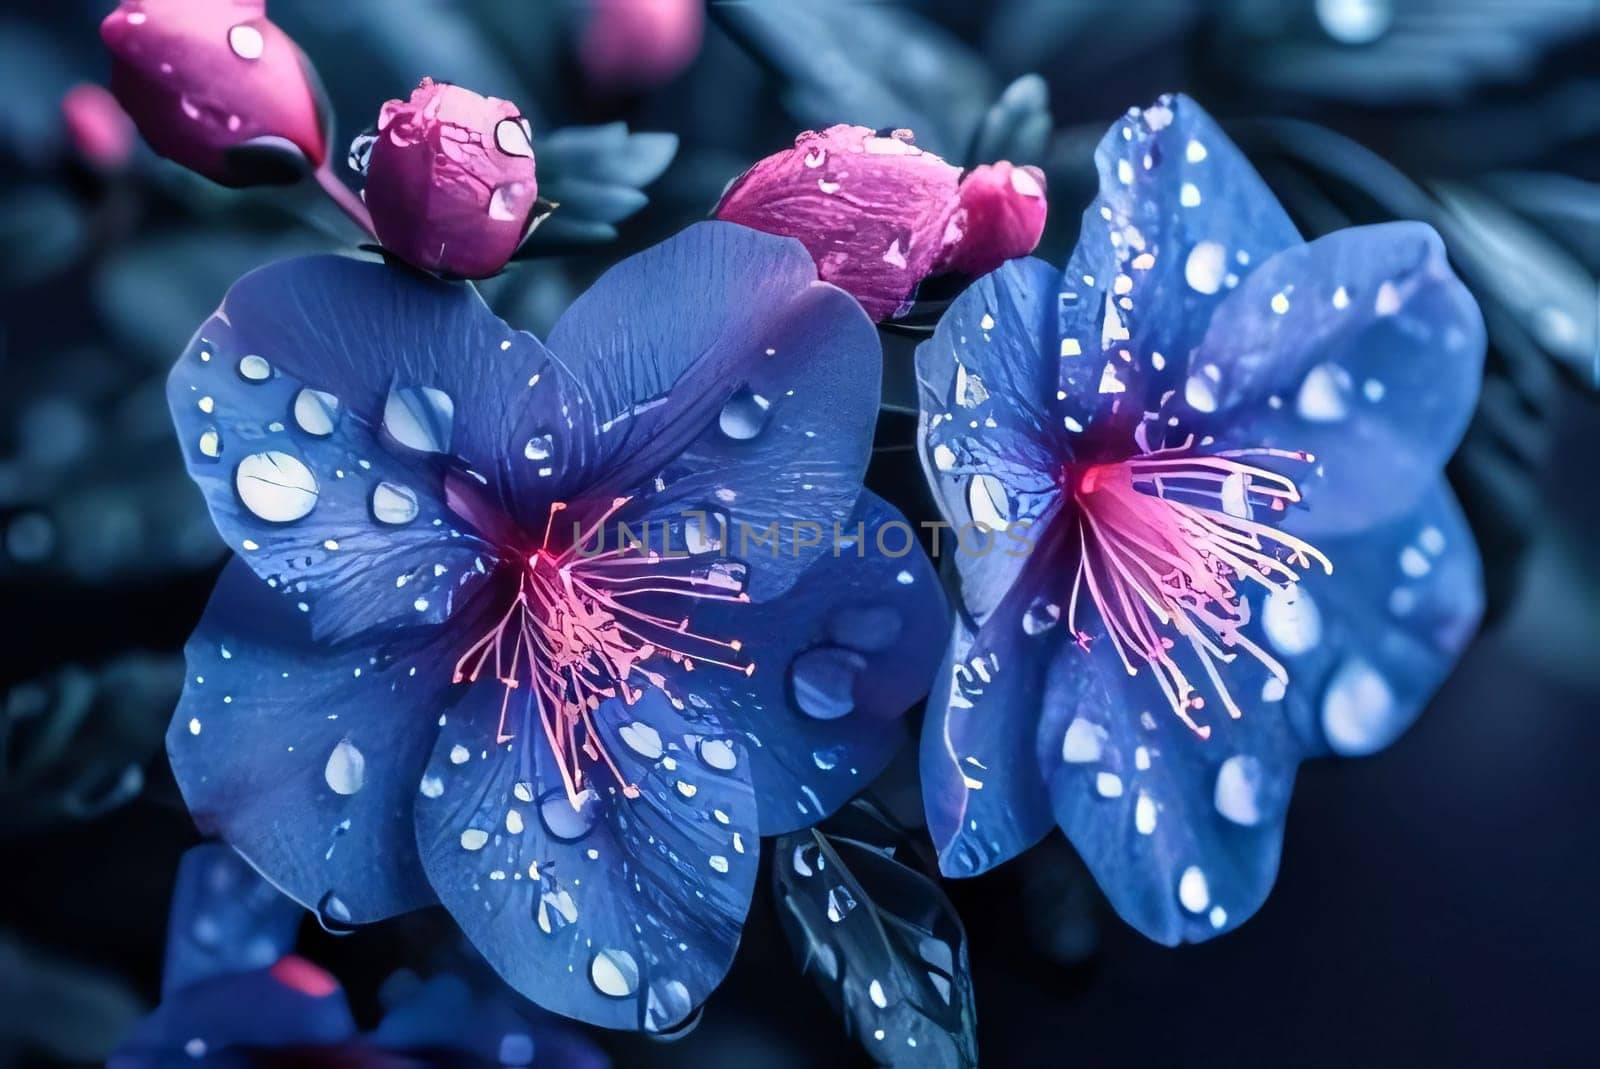 Blue flowers with raindrops, dew on a dark background, buds. Flowering flowers, a symbol of spring, new life. A joyful time of nature waking up to life.